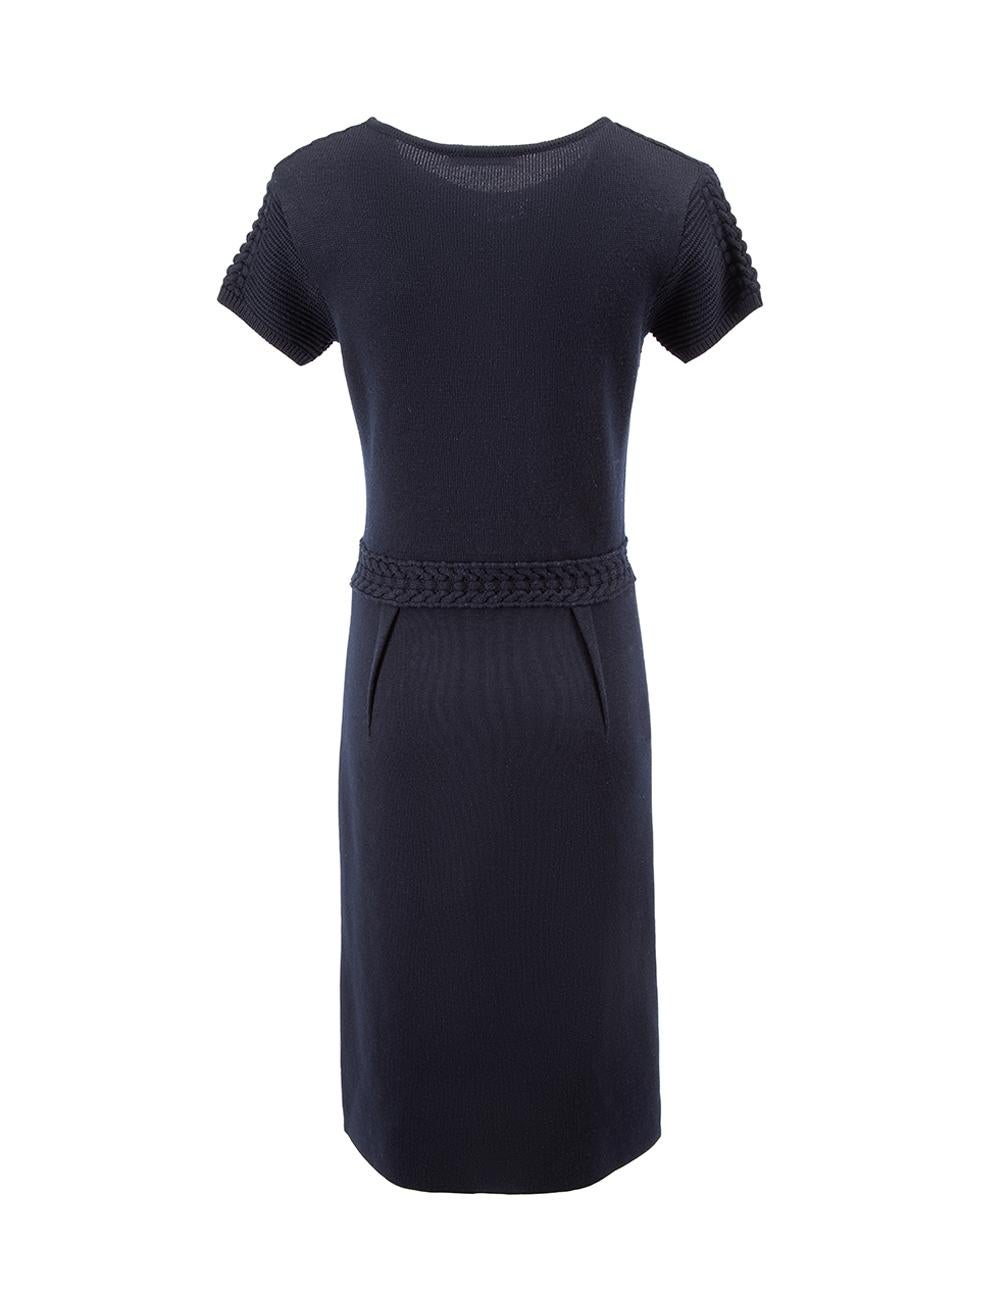 Black Navy Wool Cable Knit Dress Size M